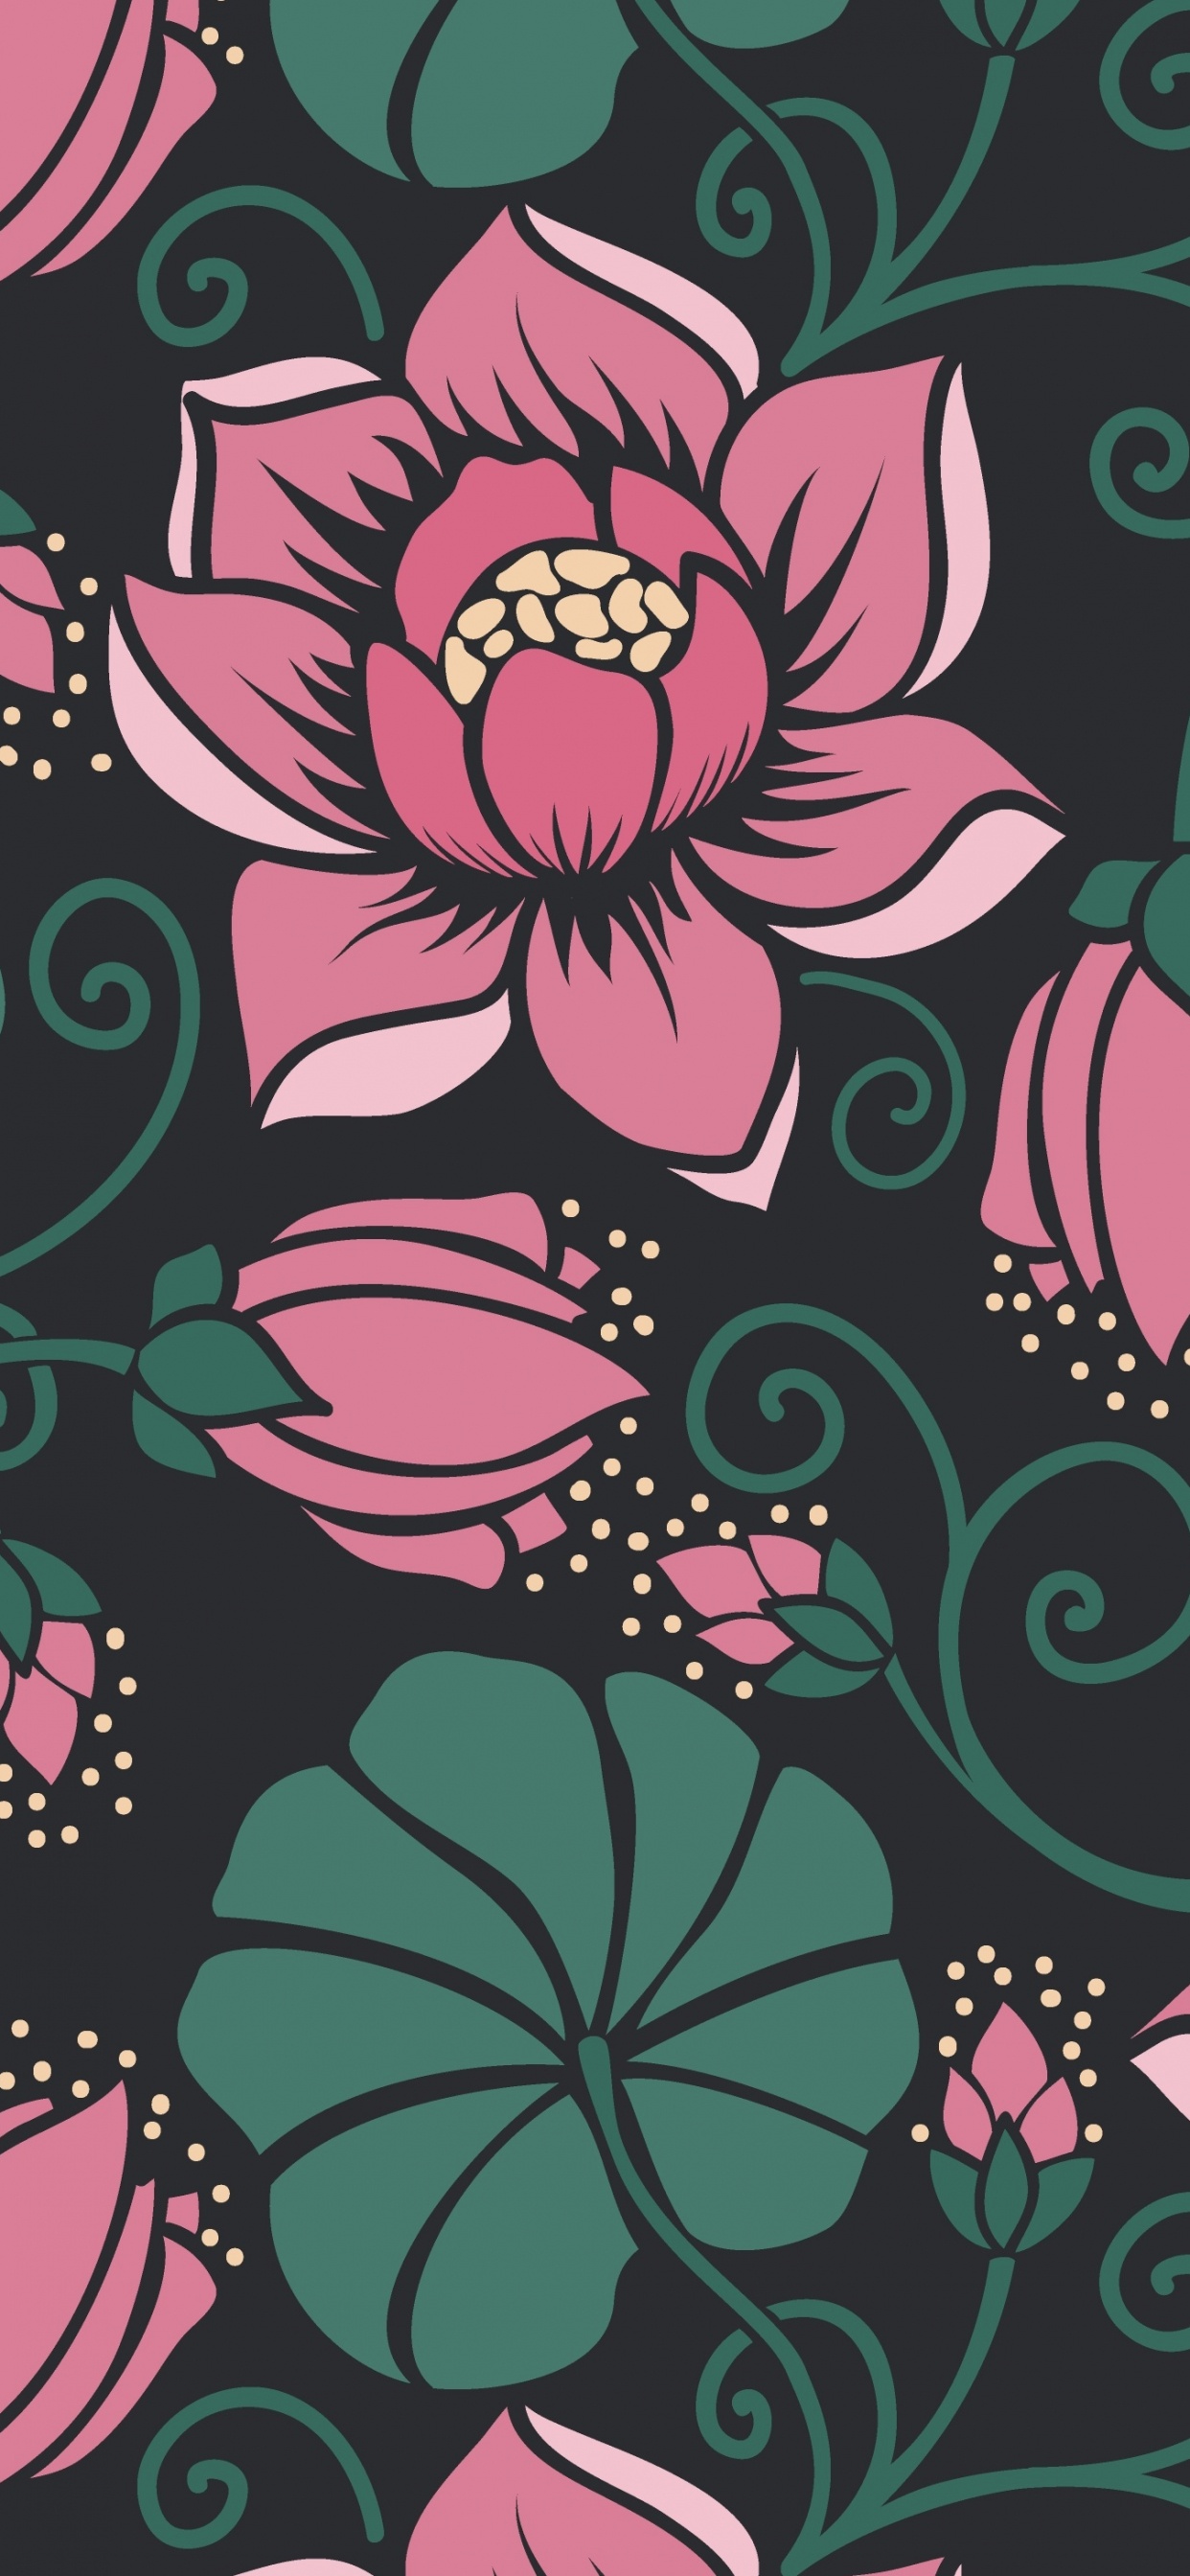 Black and Pink Floral Textile. Wallpaper in 1242x2688 Resolution